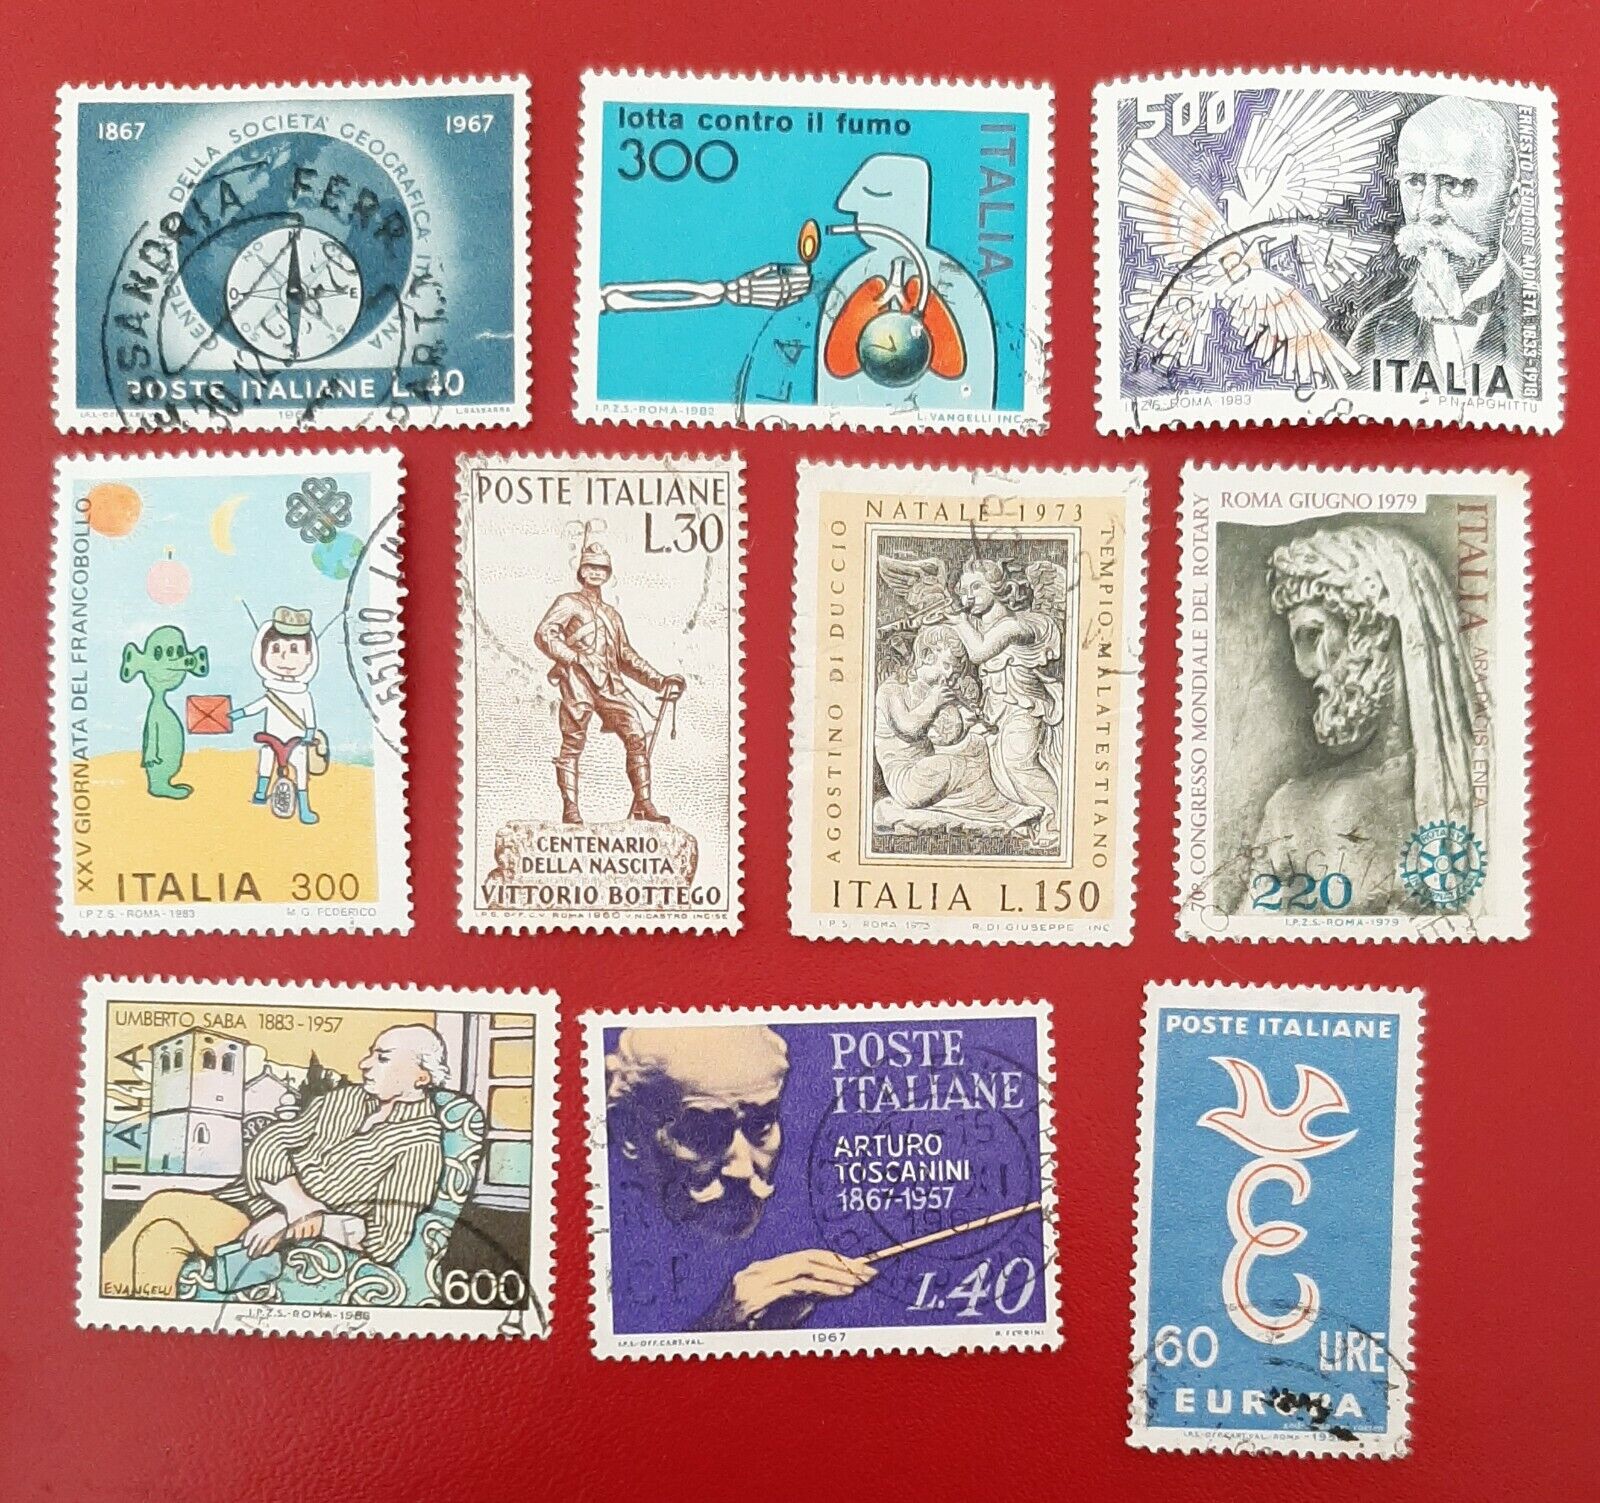 Italy postage stamps (Lot 2) used, a variety of 10 stamps.